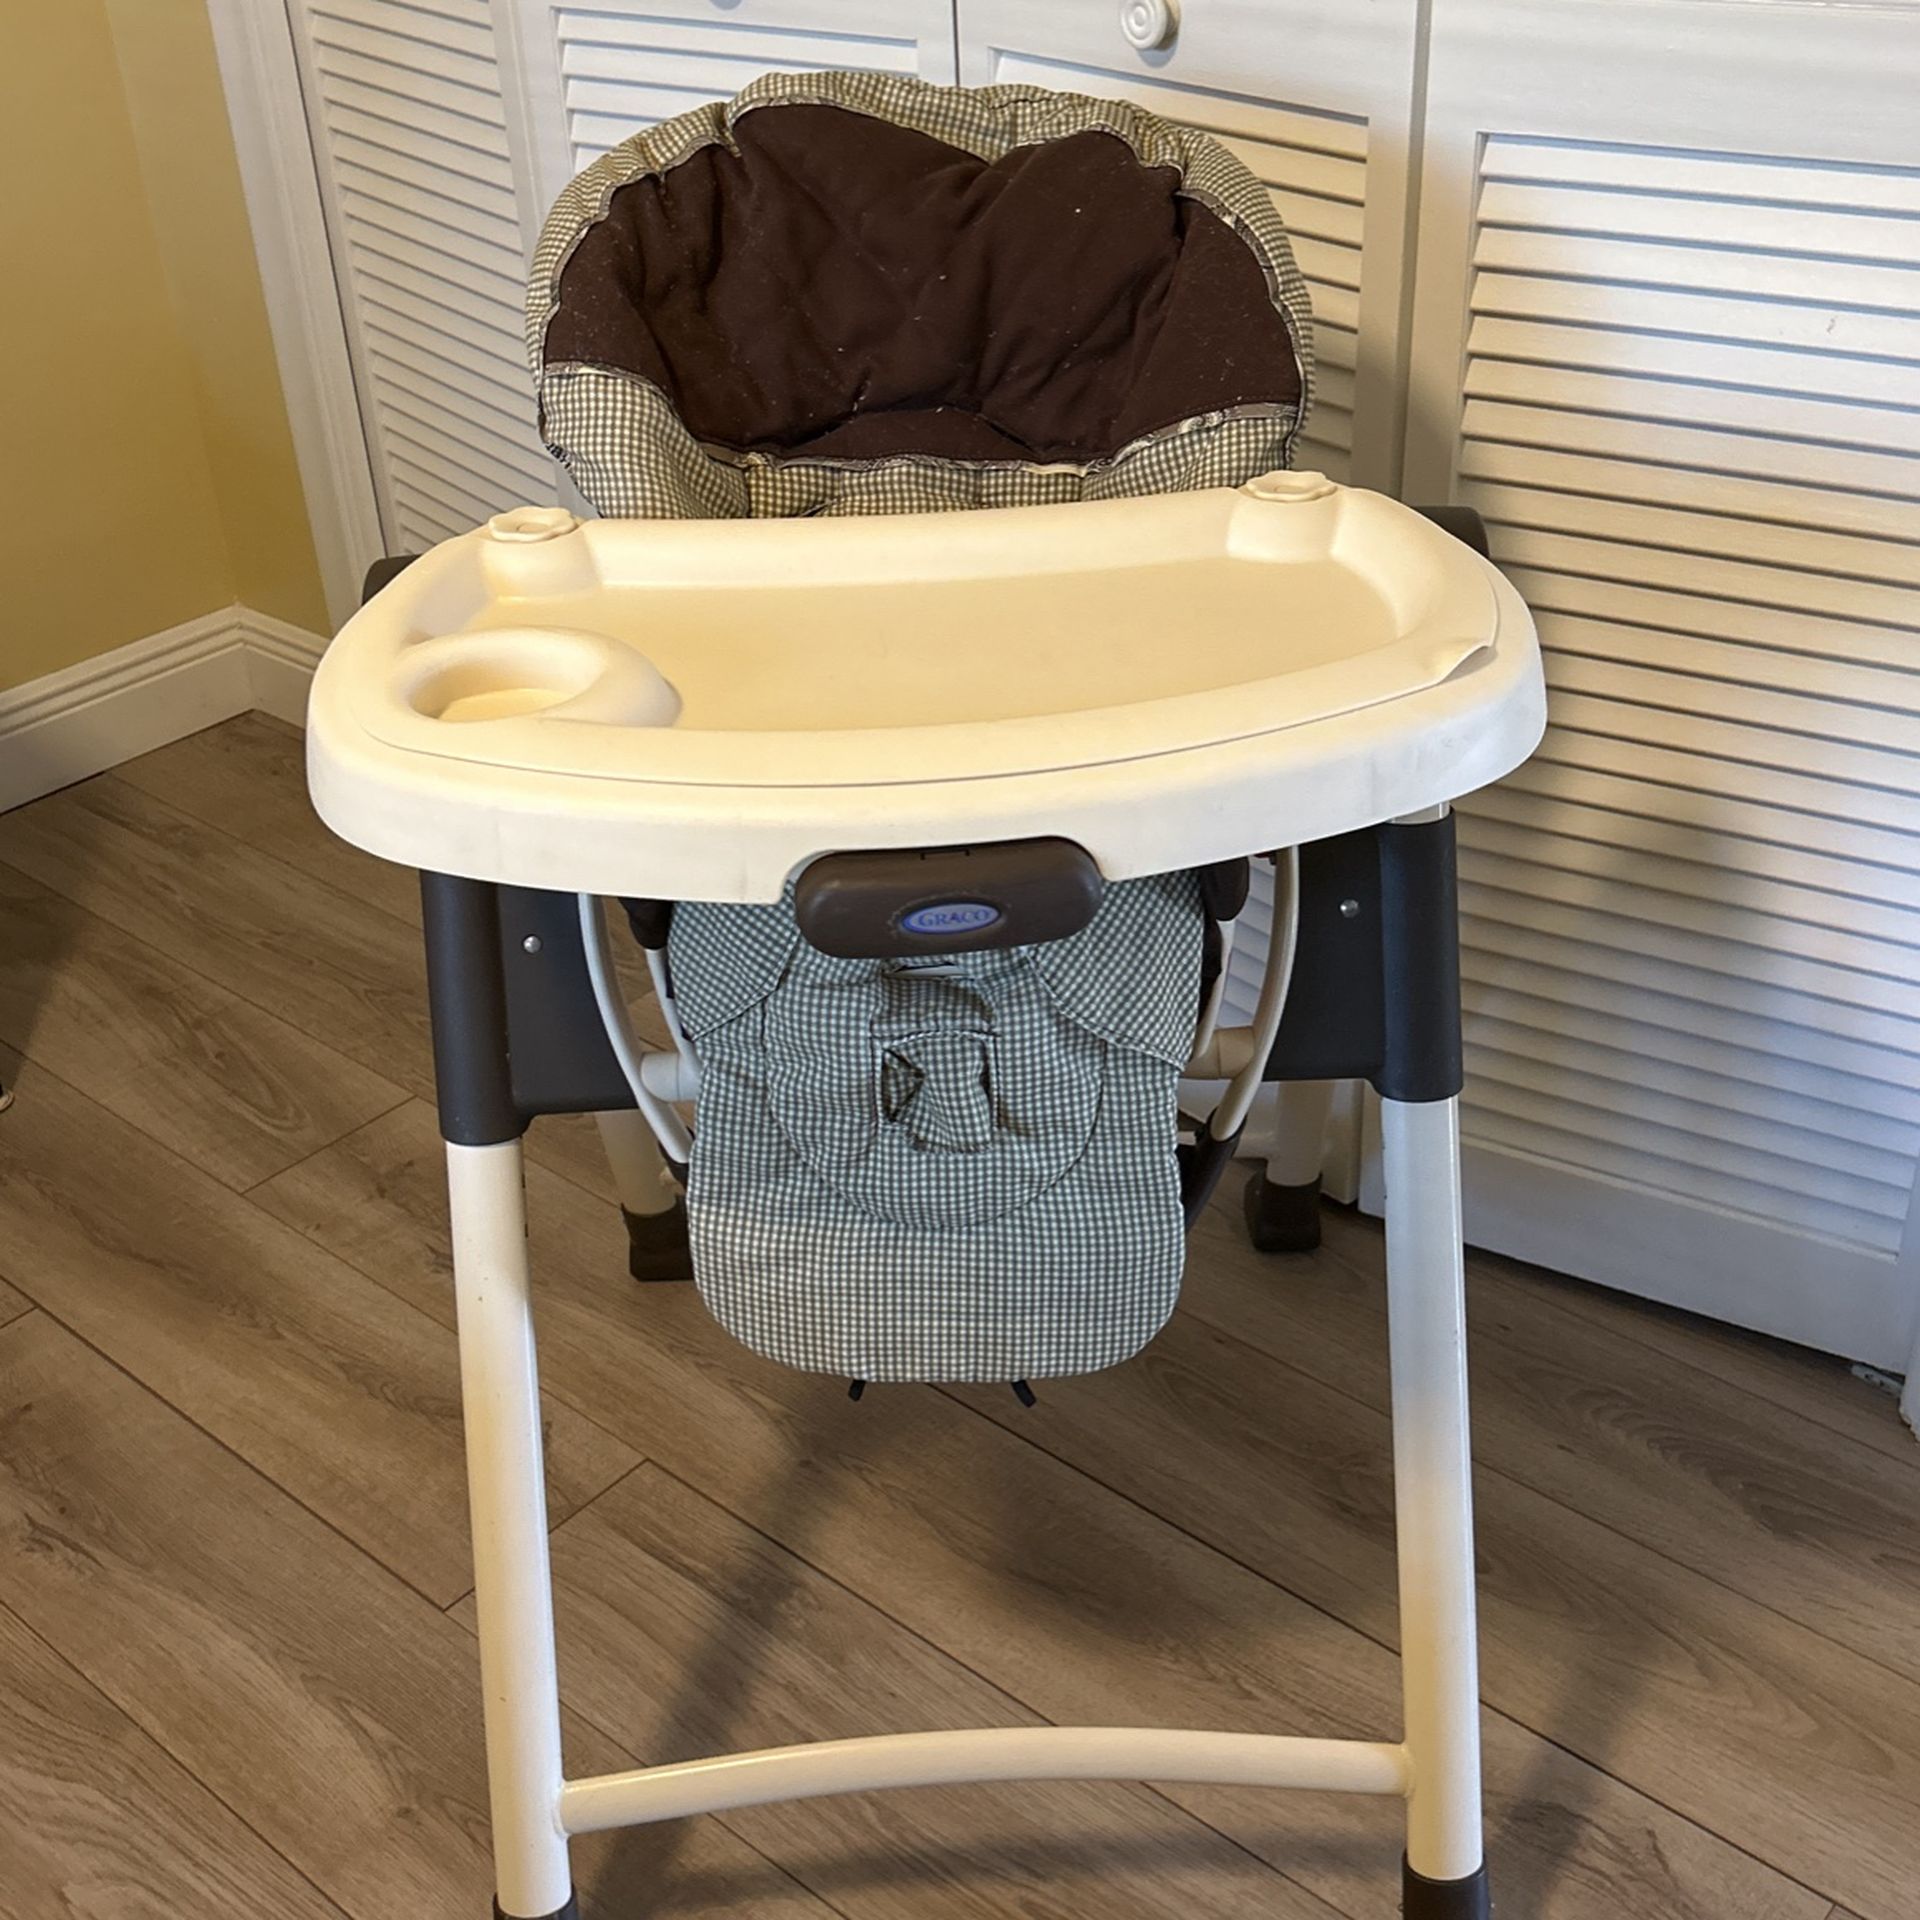 Graco High Chair 6 In 1